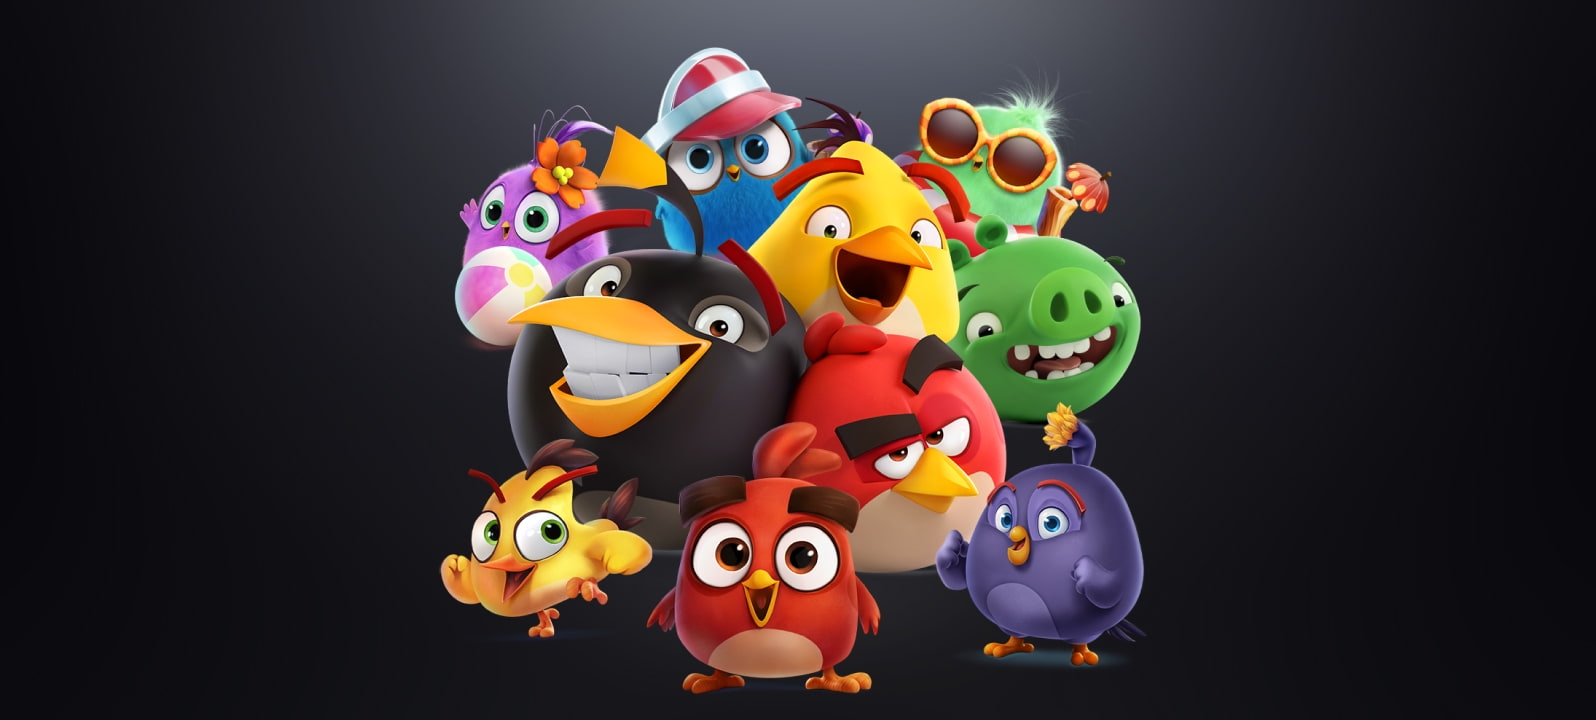 ROVIO. User research and 3D assets management services